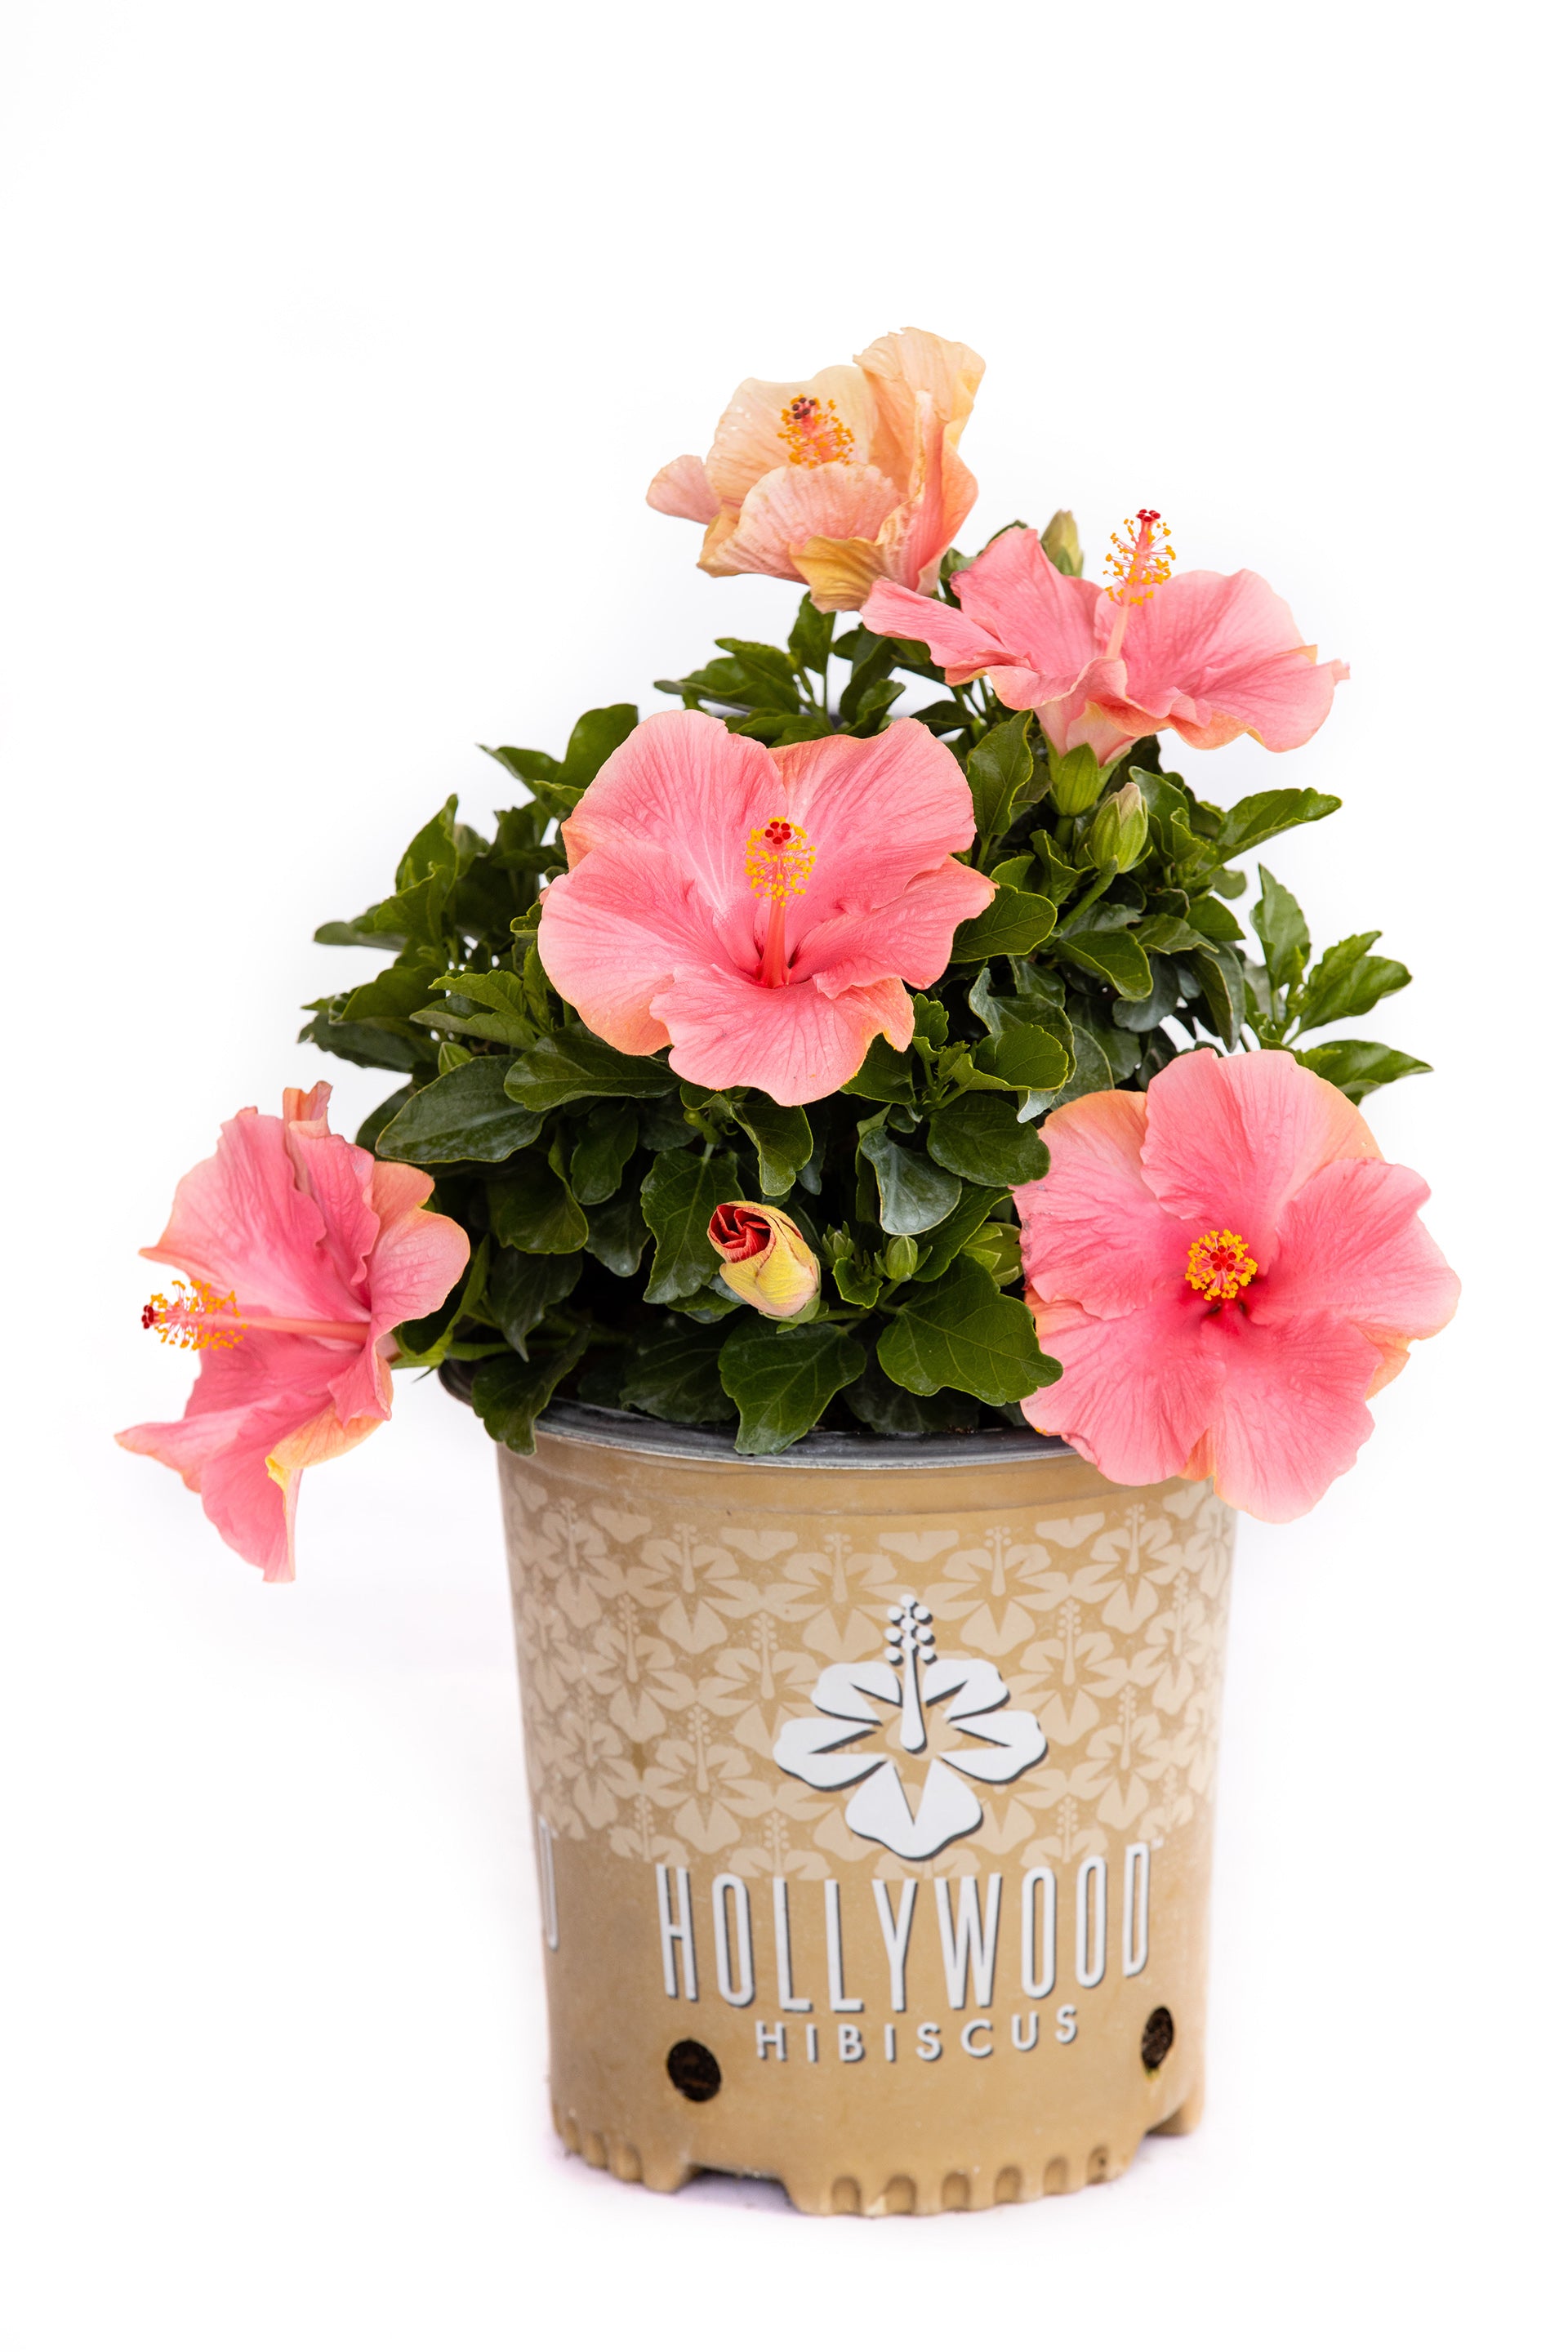 First Lady™ - Hollywood® Hibiscus - 2 Gallon